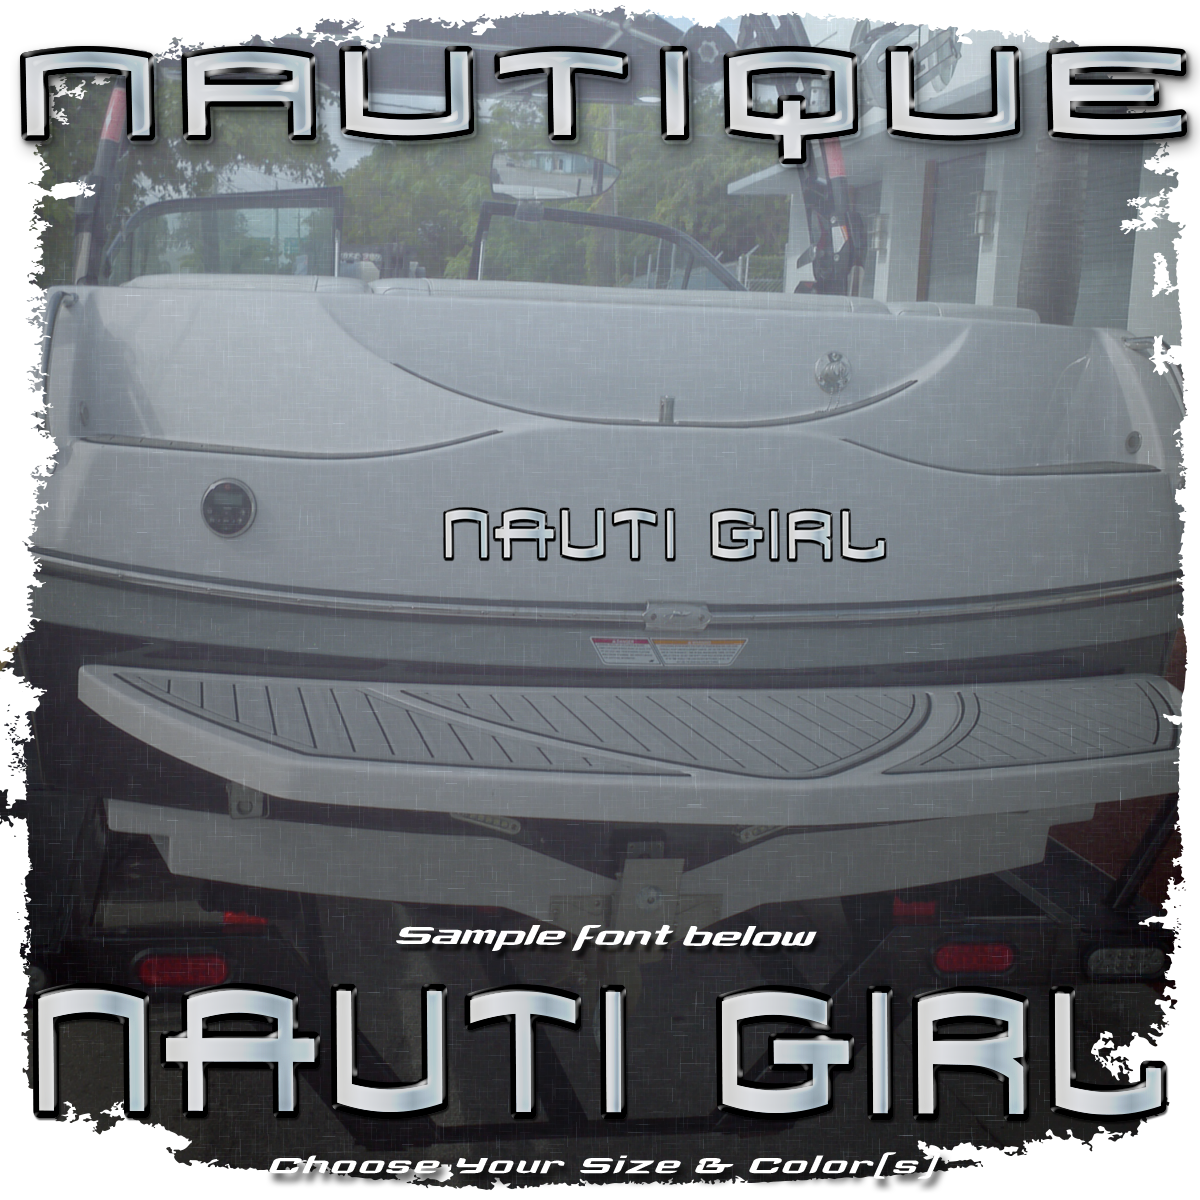 Domed Boat Name in the 2003 Super Air Nautique 210 Font, Choose Your Own Size & Colors